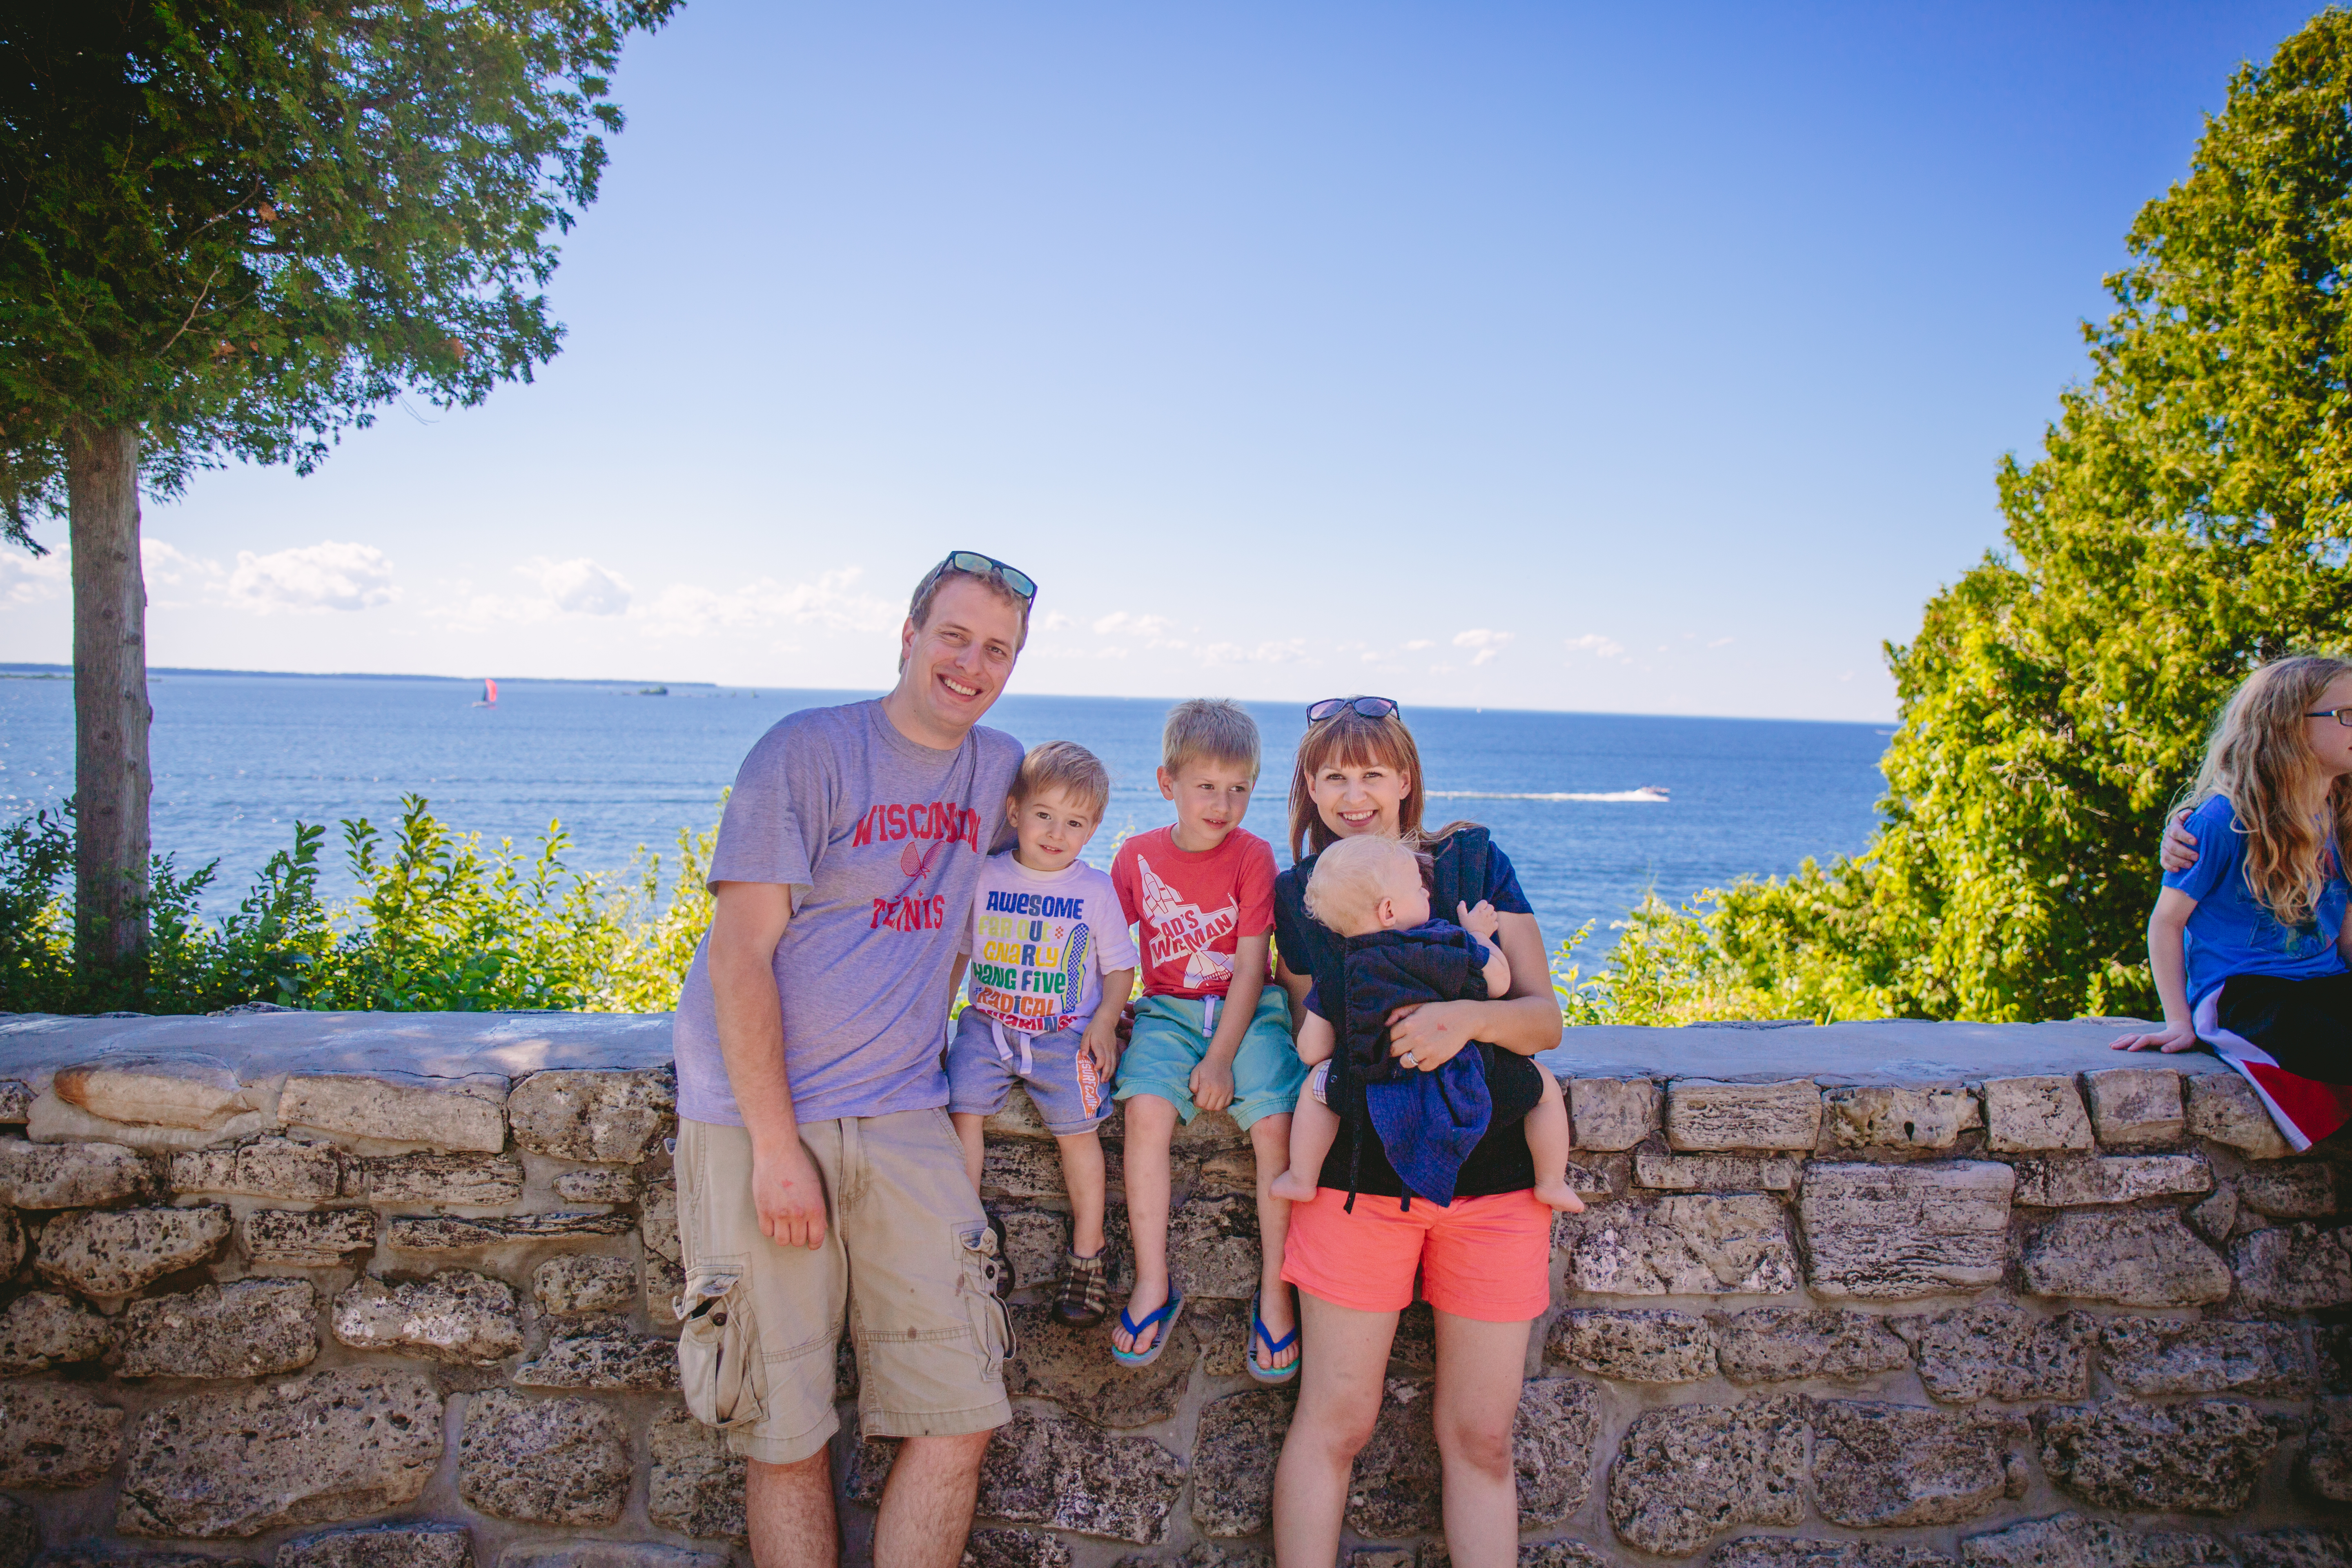 Our family photograph taken at Eagle Bluff Door County, Wisconsin